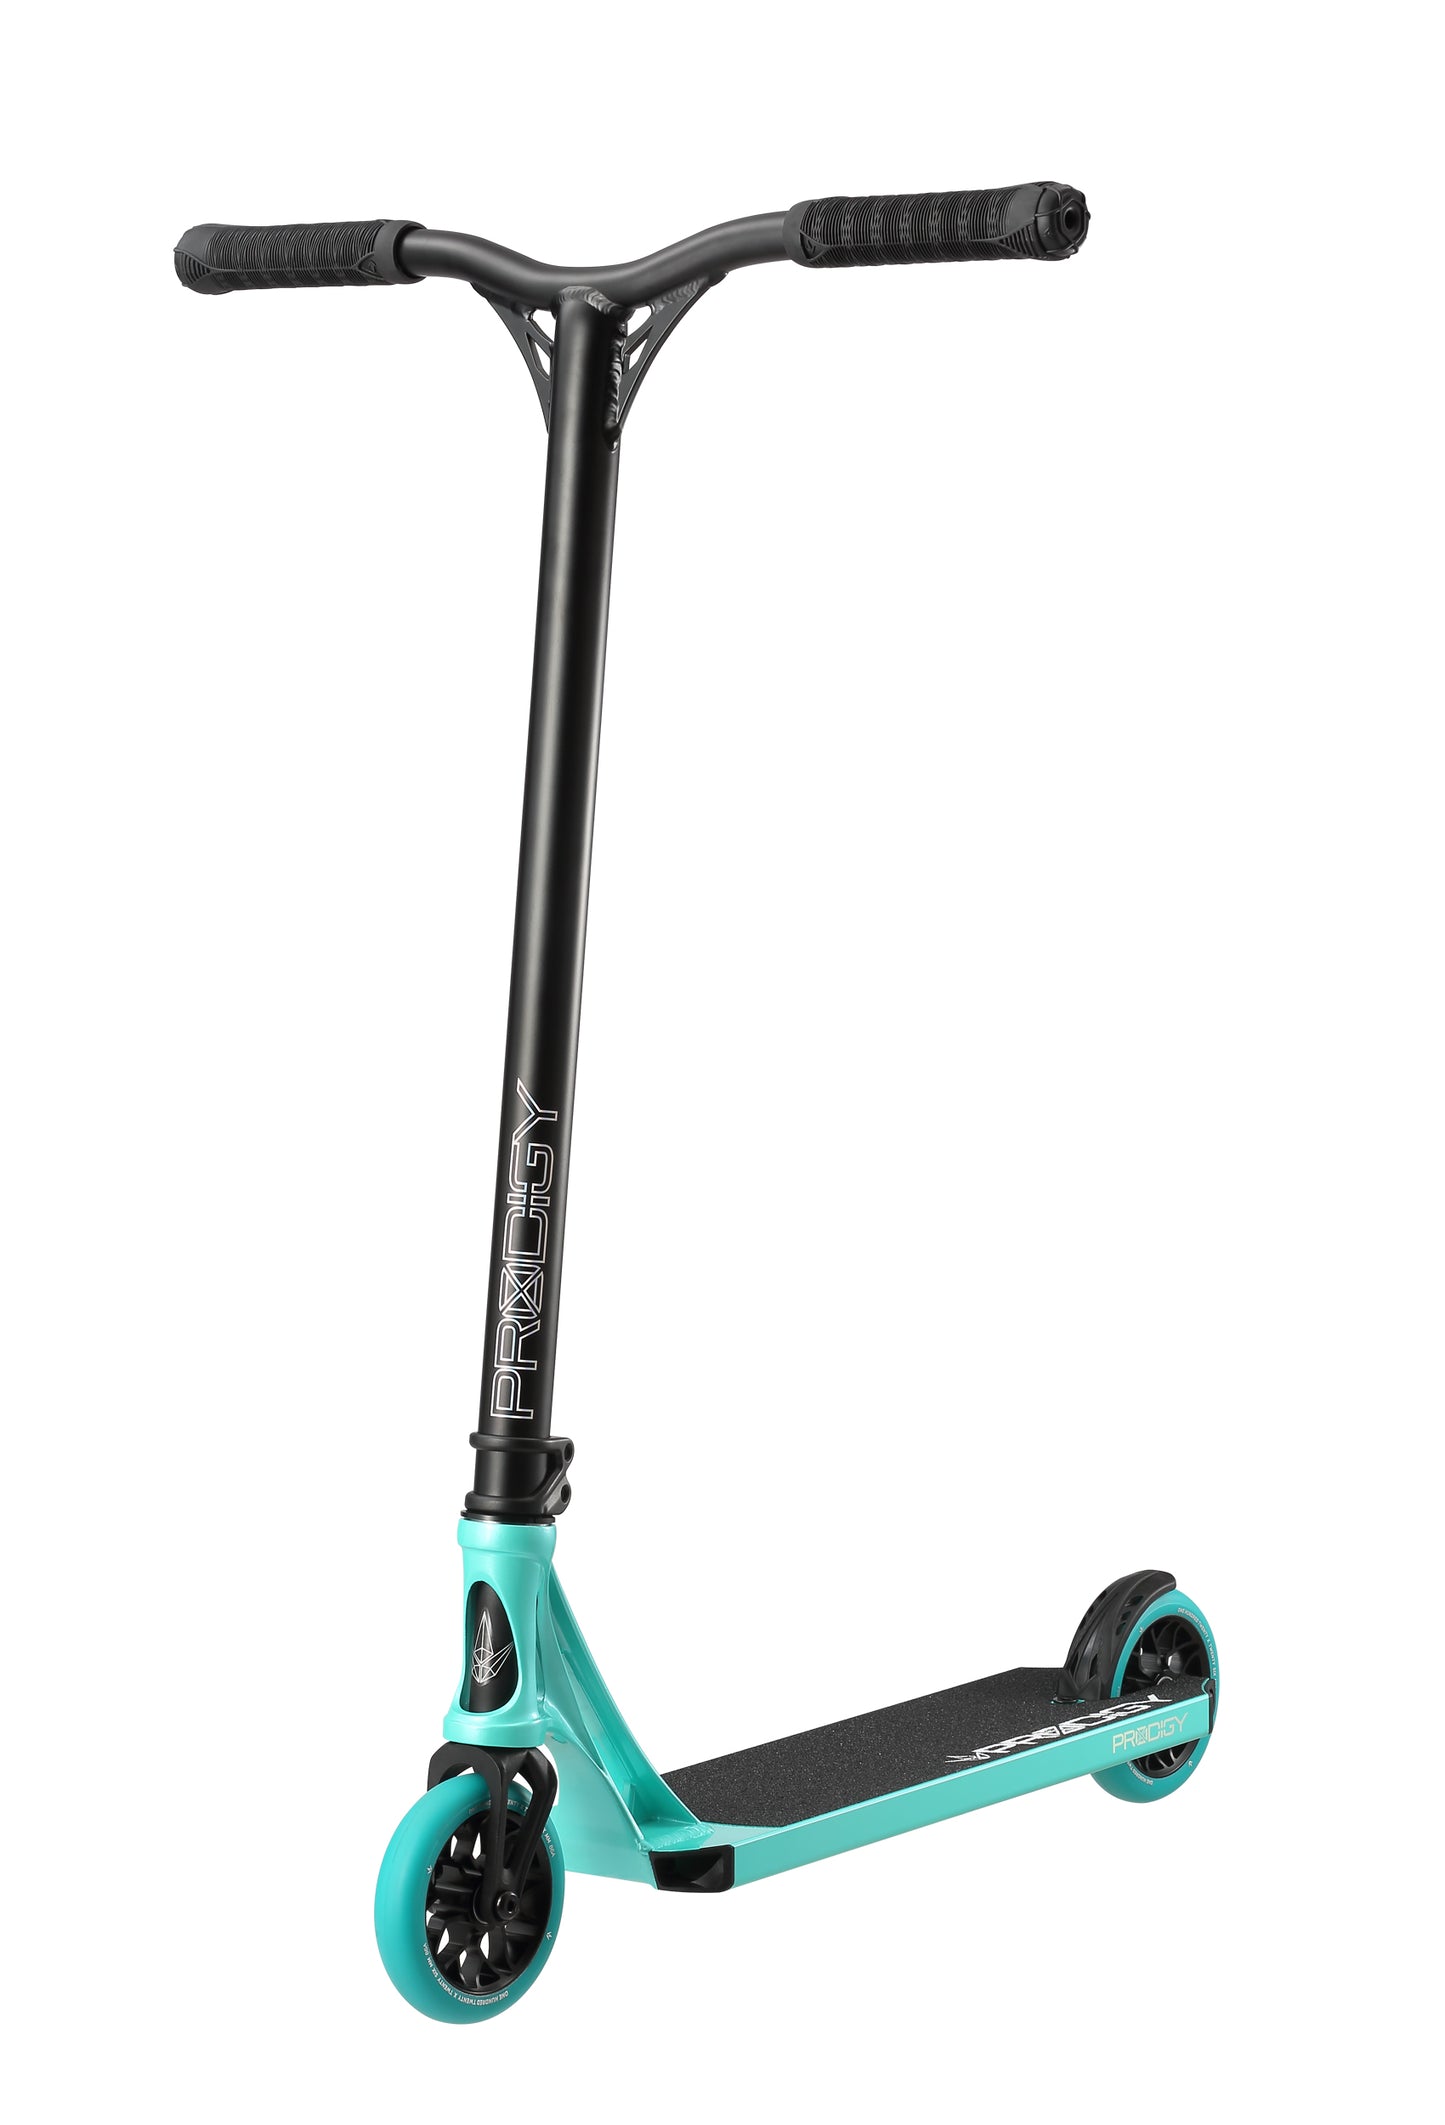 Envy Prodigy X Complete Scooter